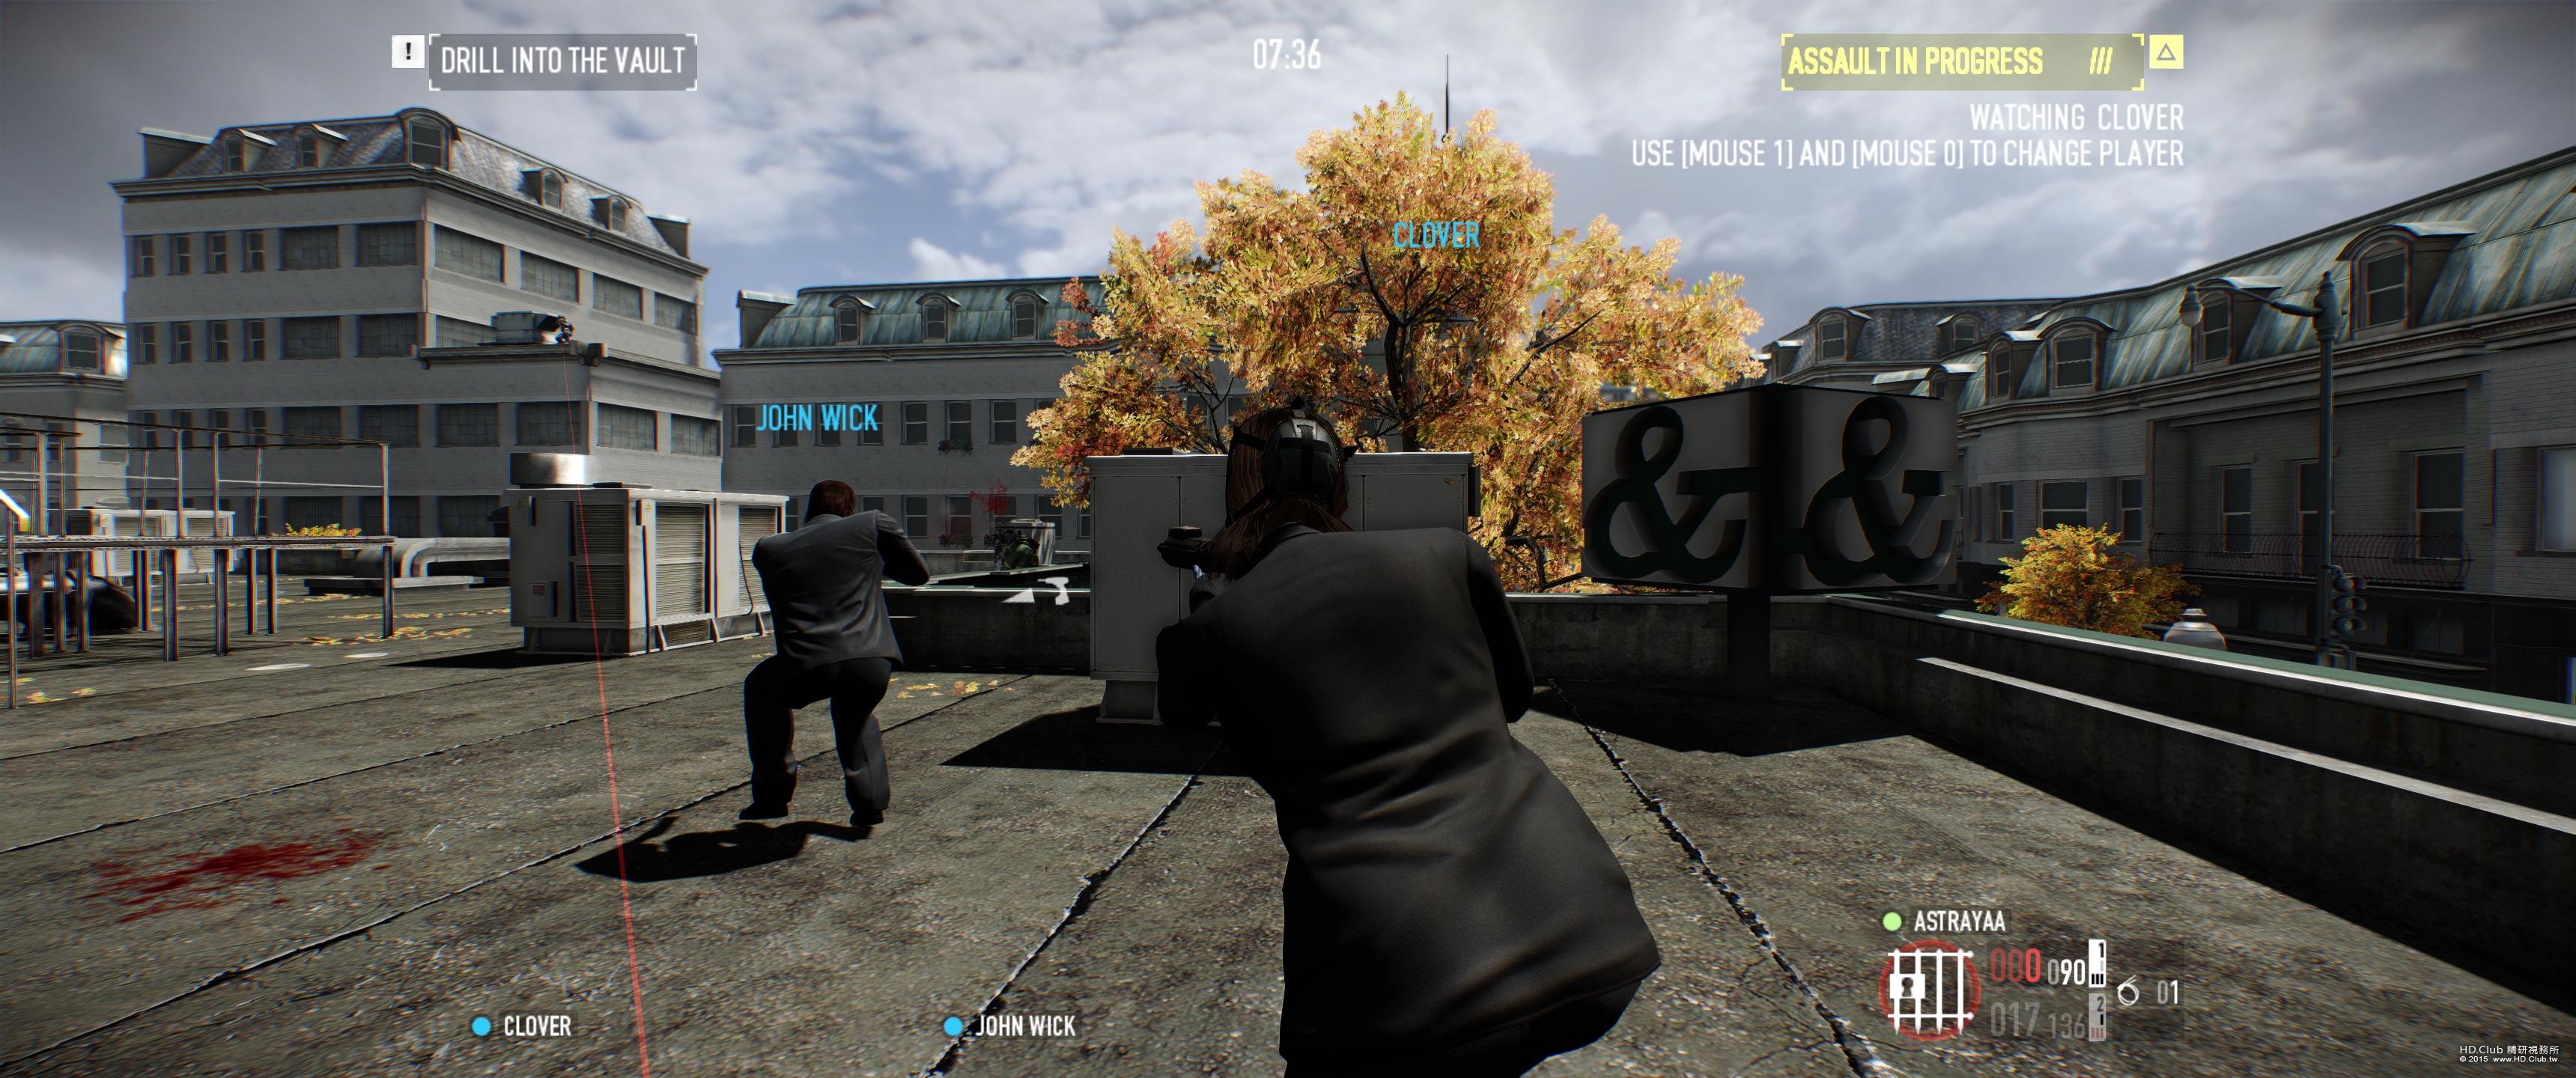 payday2_win32_release 2015-09-24 07-02-27-15.jpg